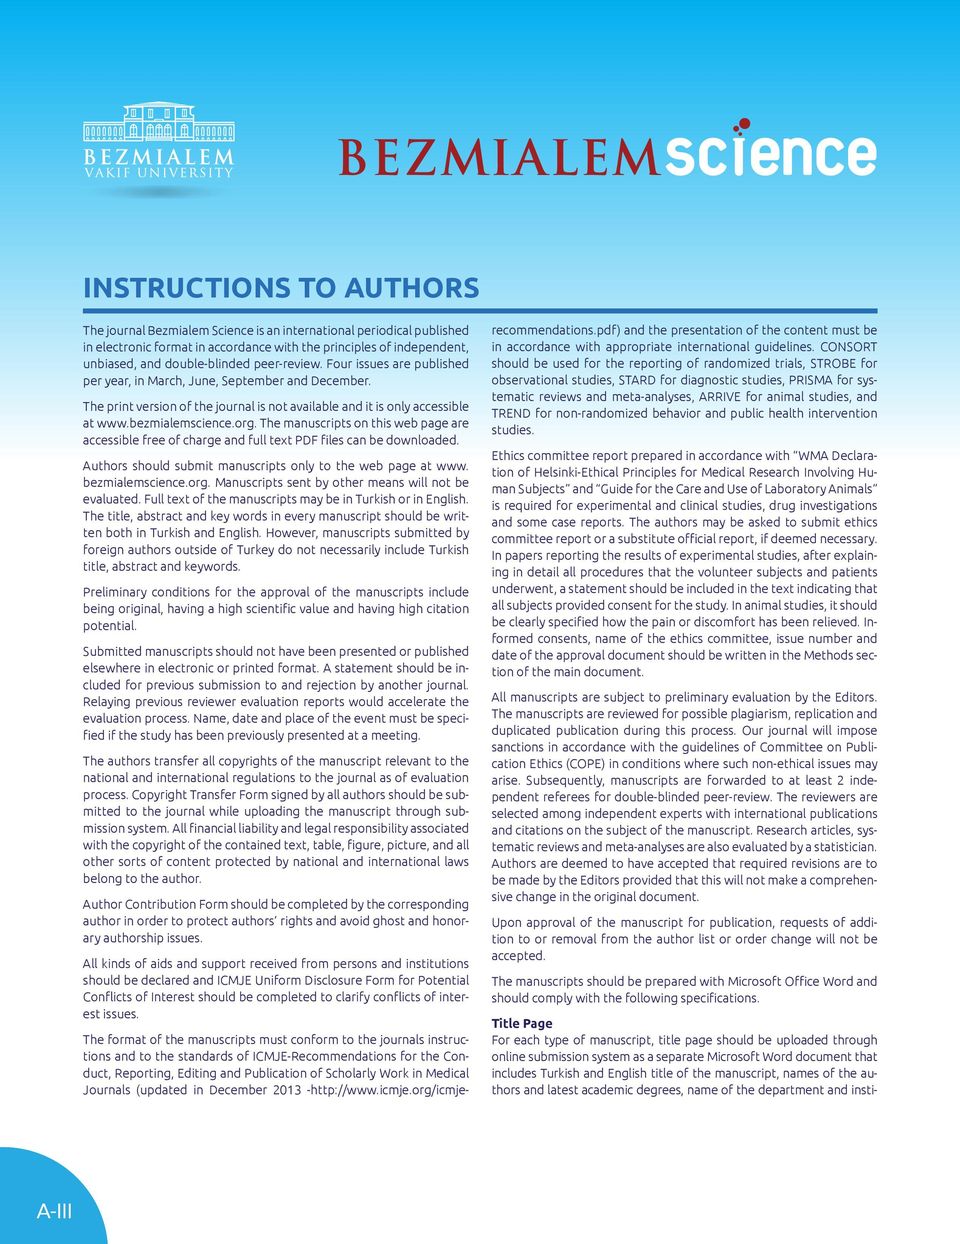 The manuscripts on this web page are accessible free of charge and full text PDF files can be downloaded. Authors should submit manuscripts only to the web page at www. bezmialemscience.org.